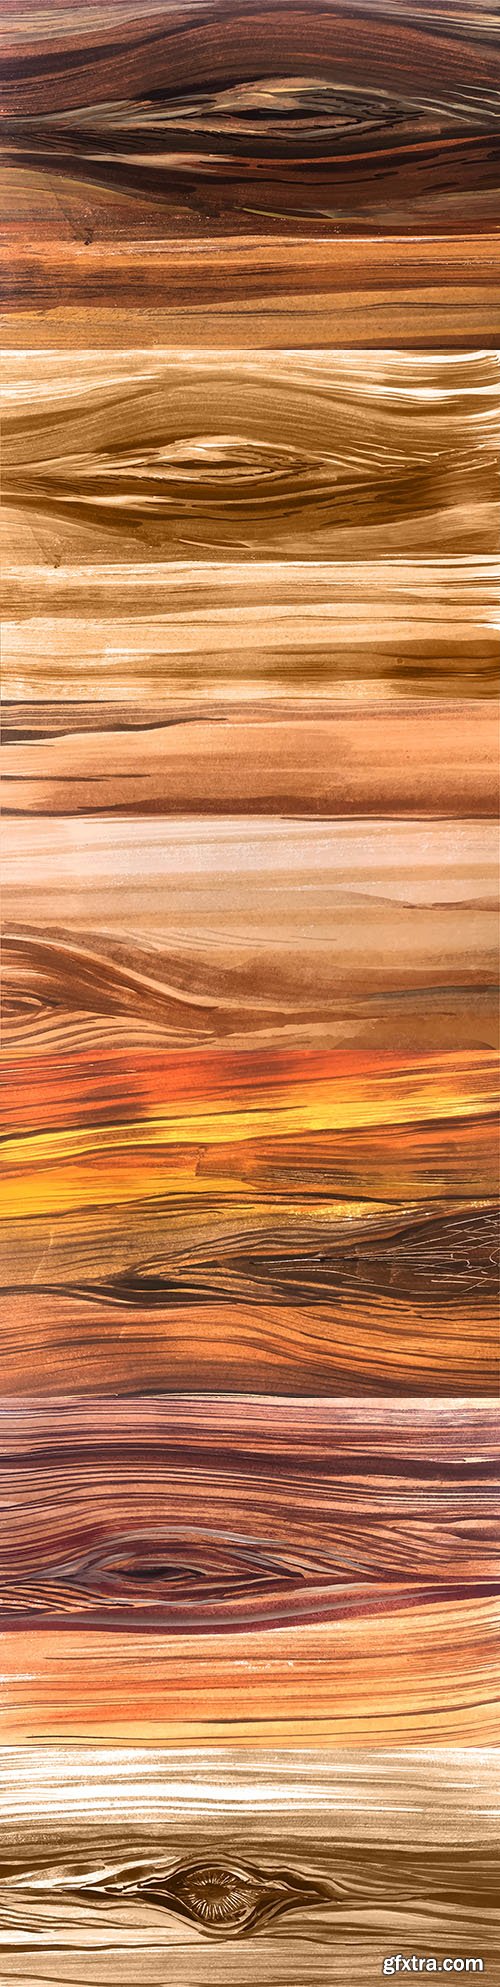 Abstract brown wooden design watercolor texture